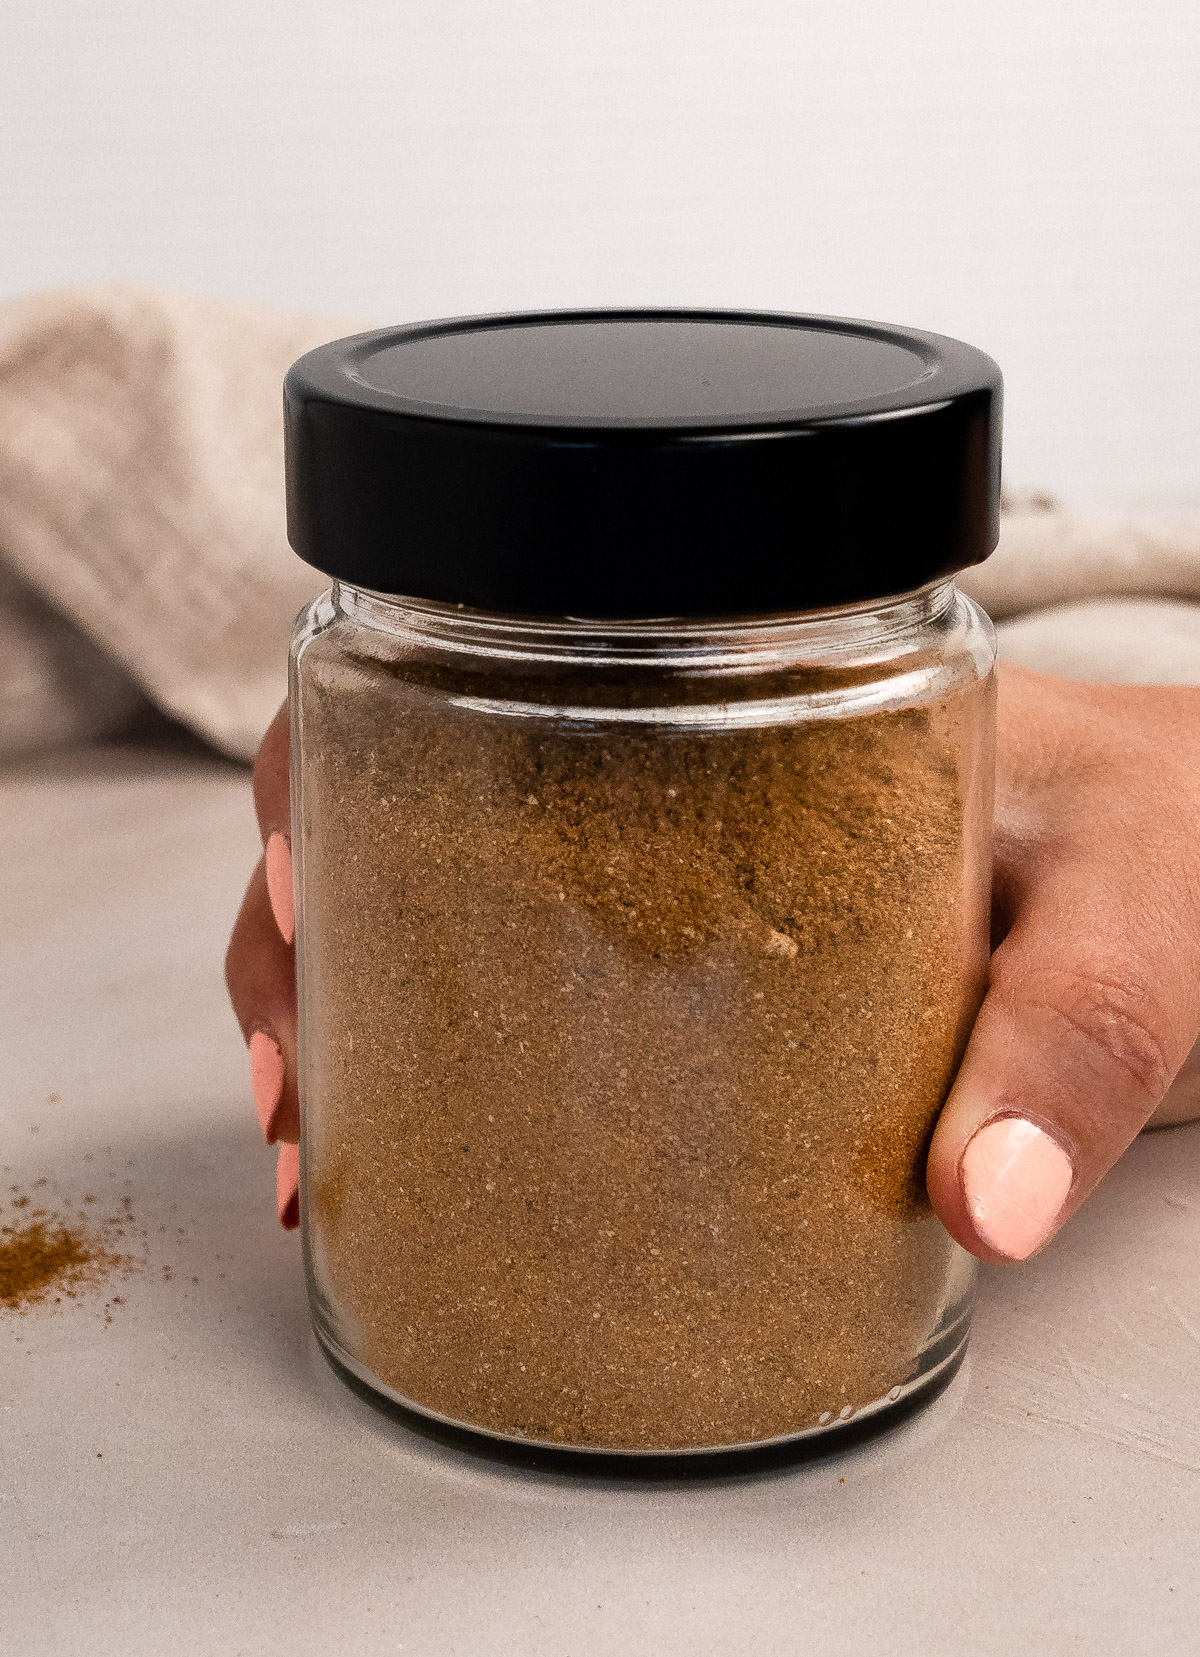 a female hand holding a jar of spices with a black lid